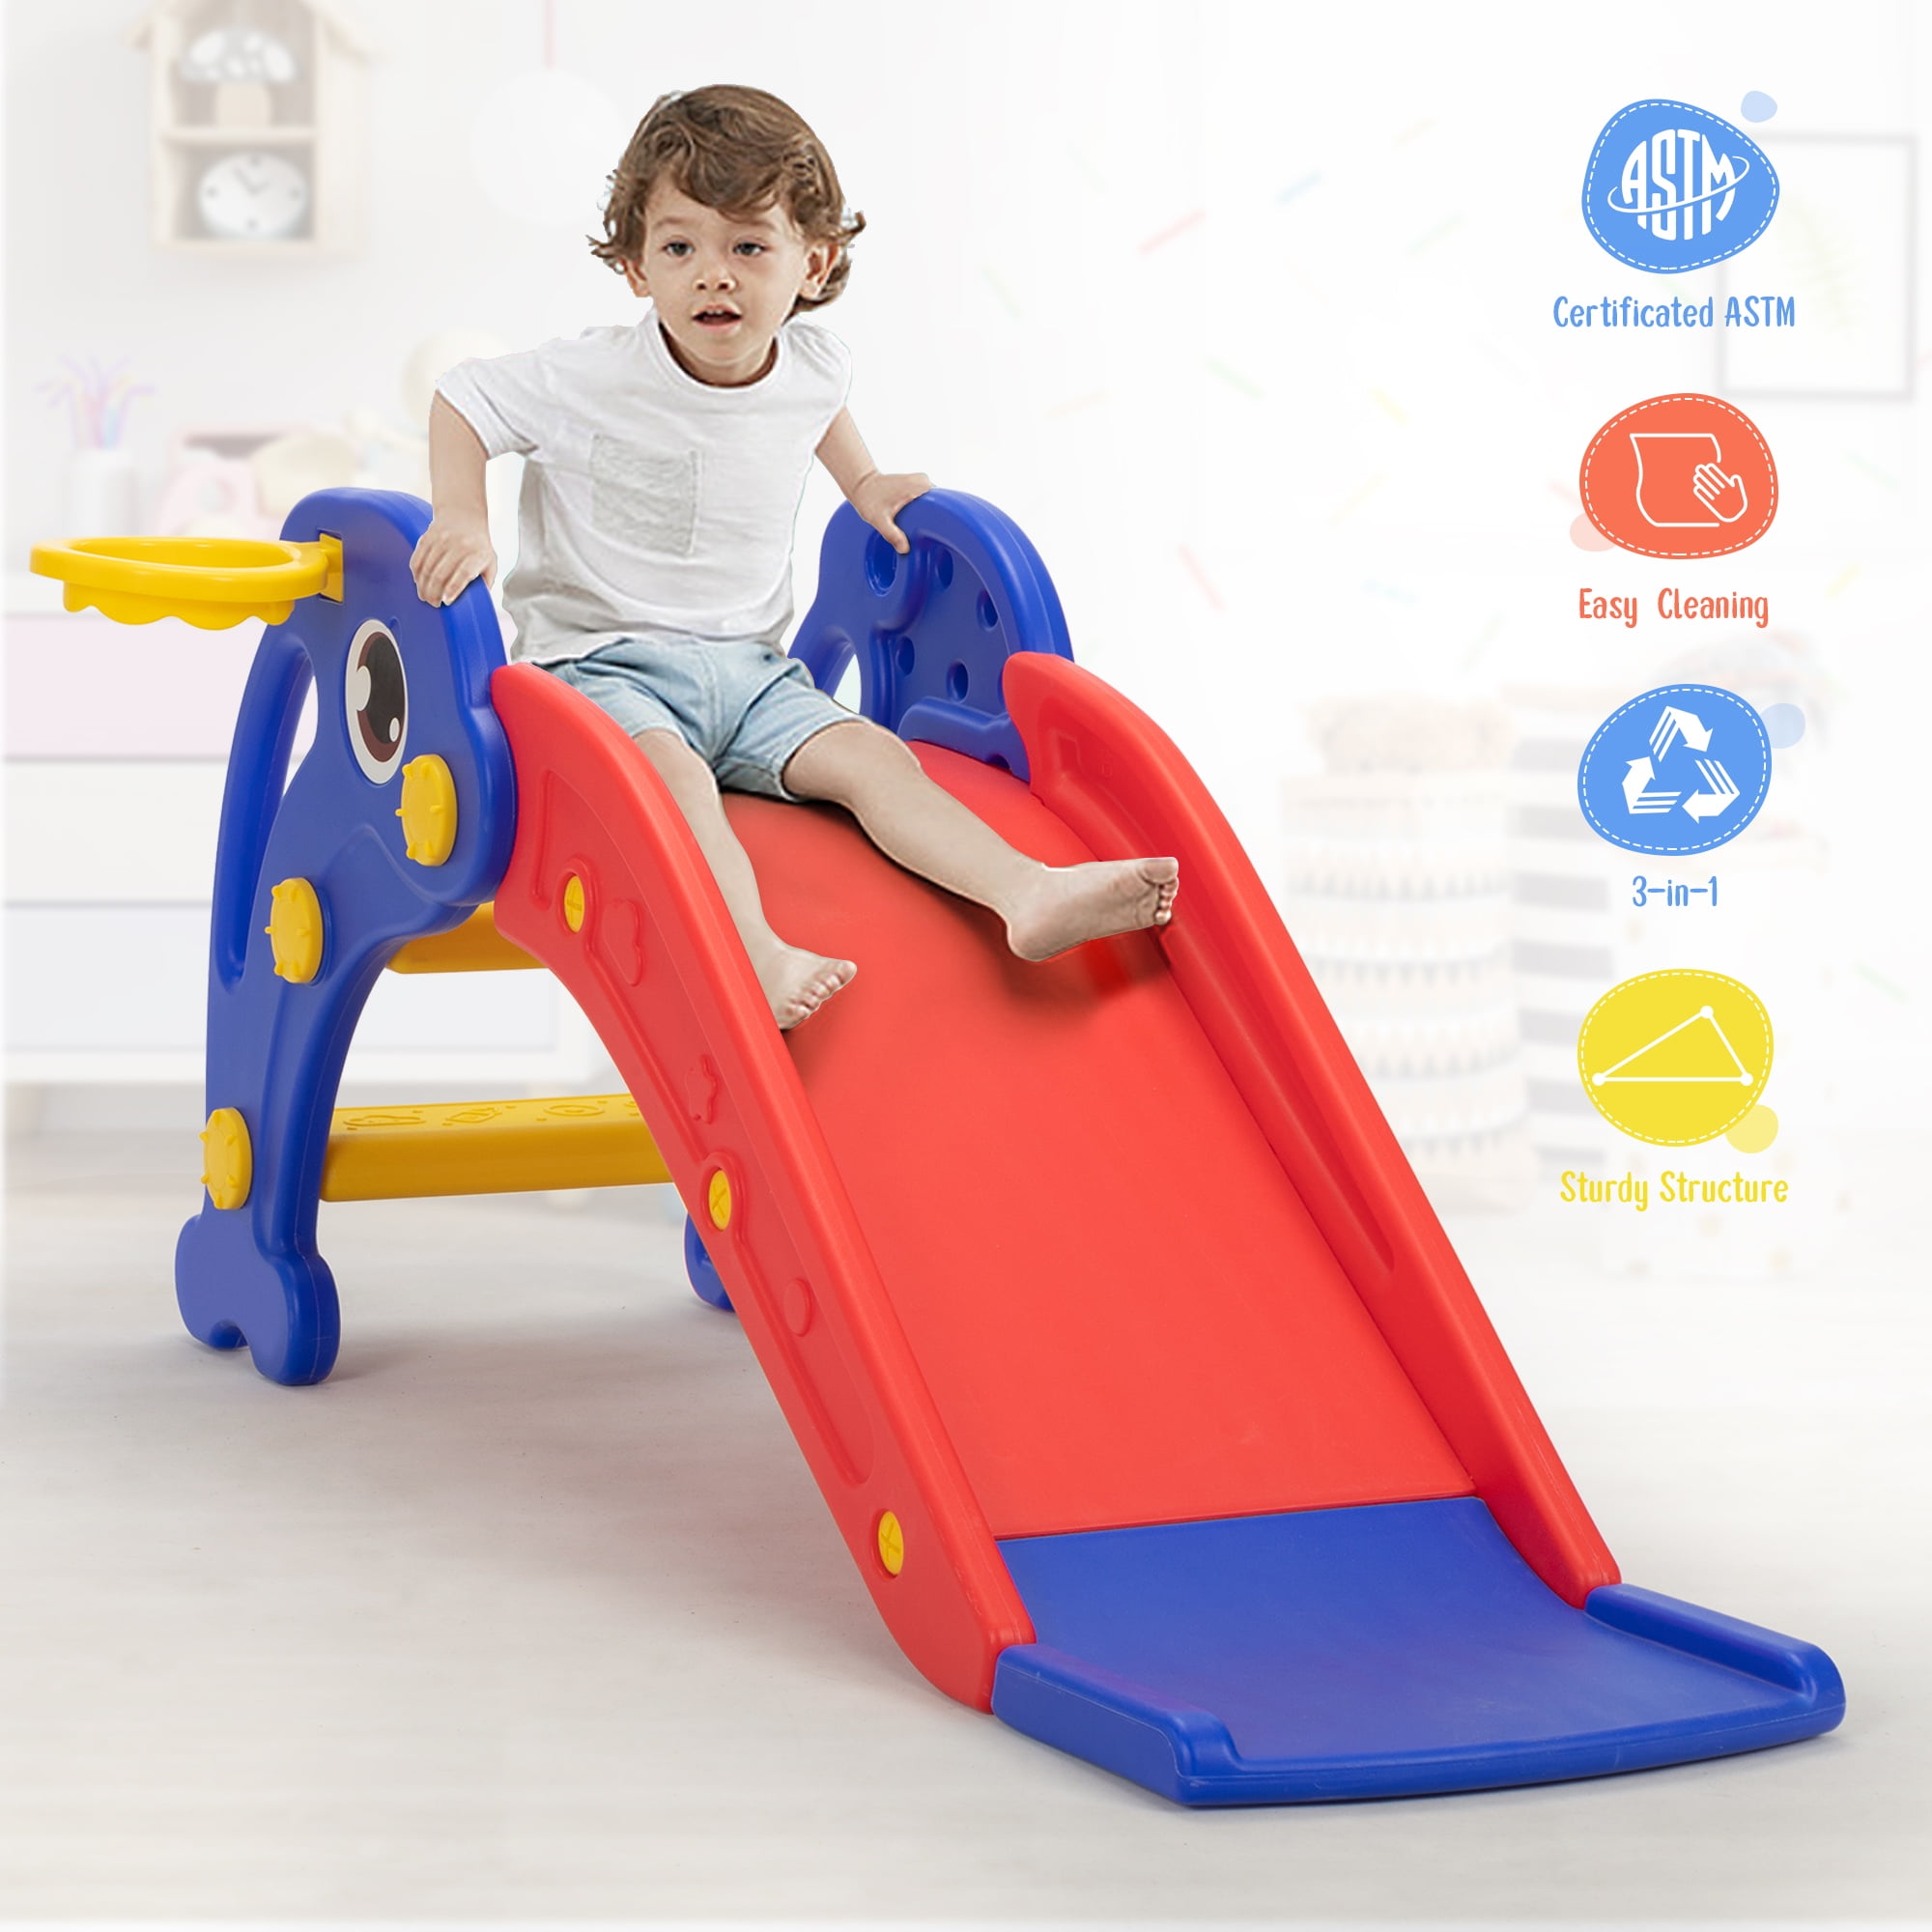 soft play toys For kids step and slide activity 110LX50WX30H CM IN BLUE AND RED 